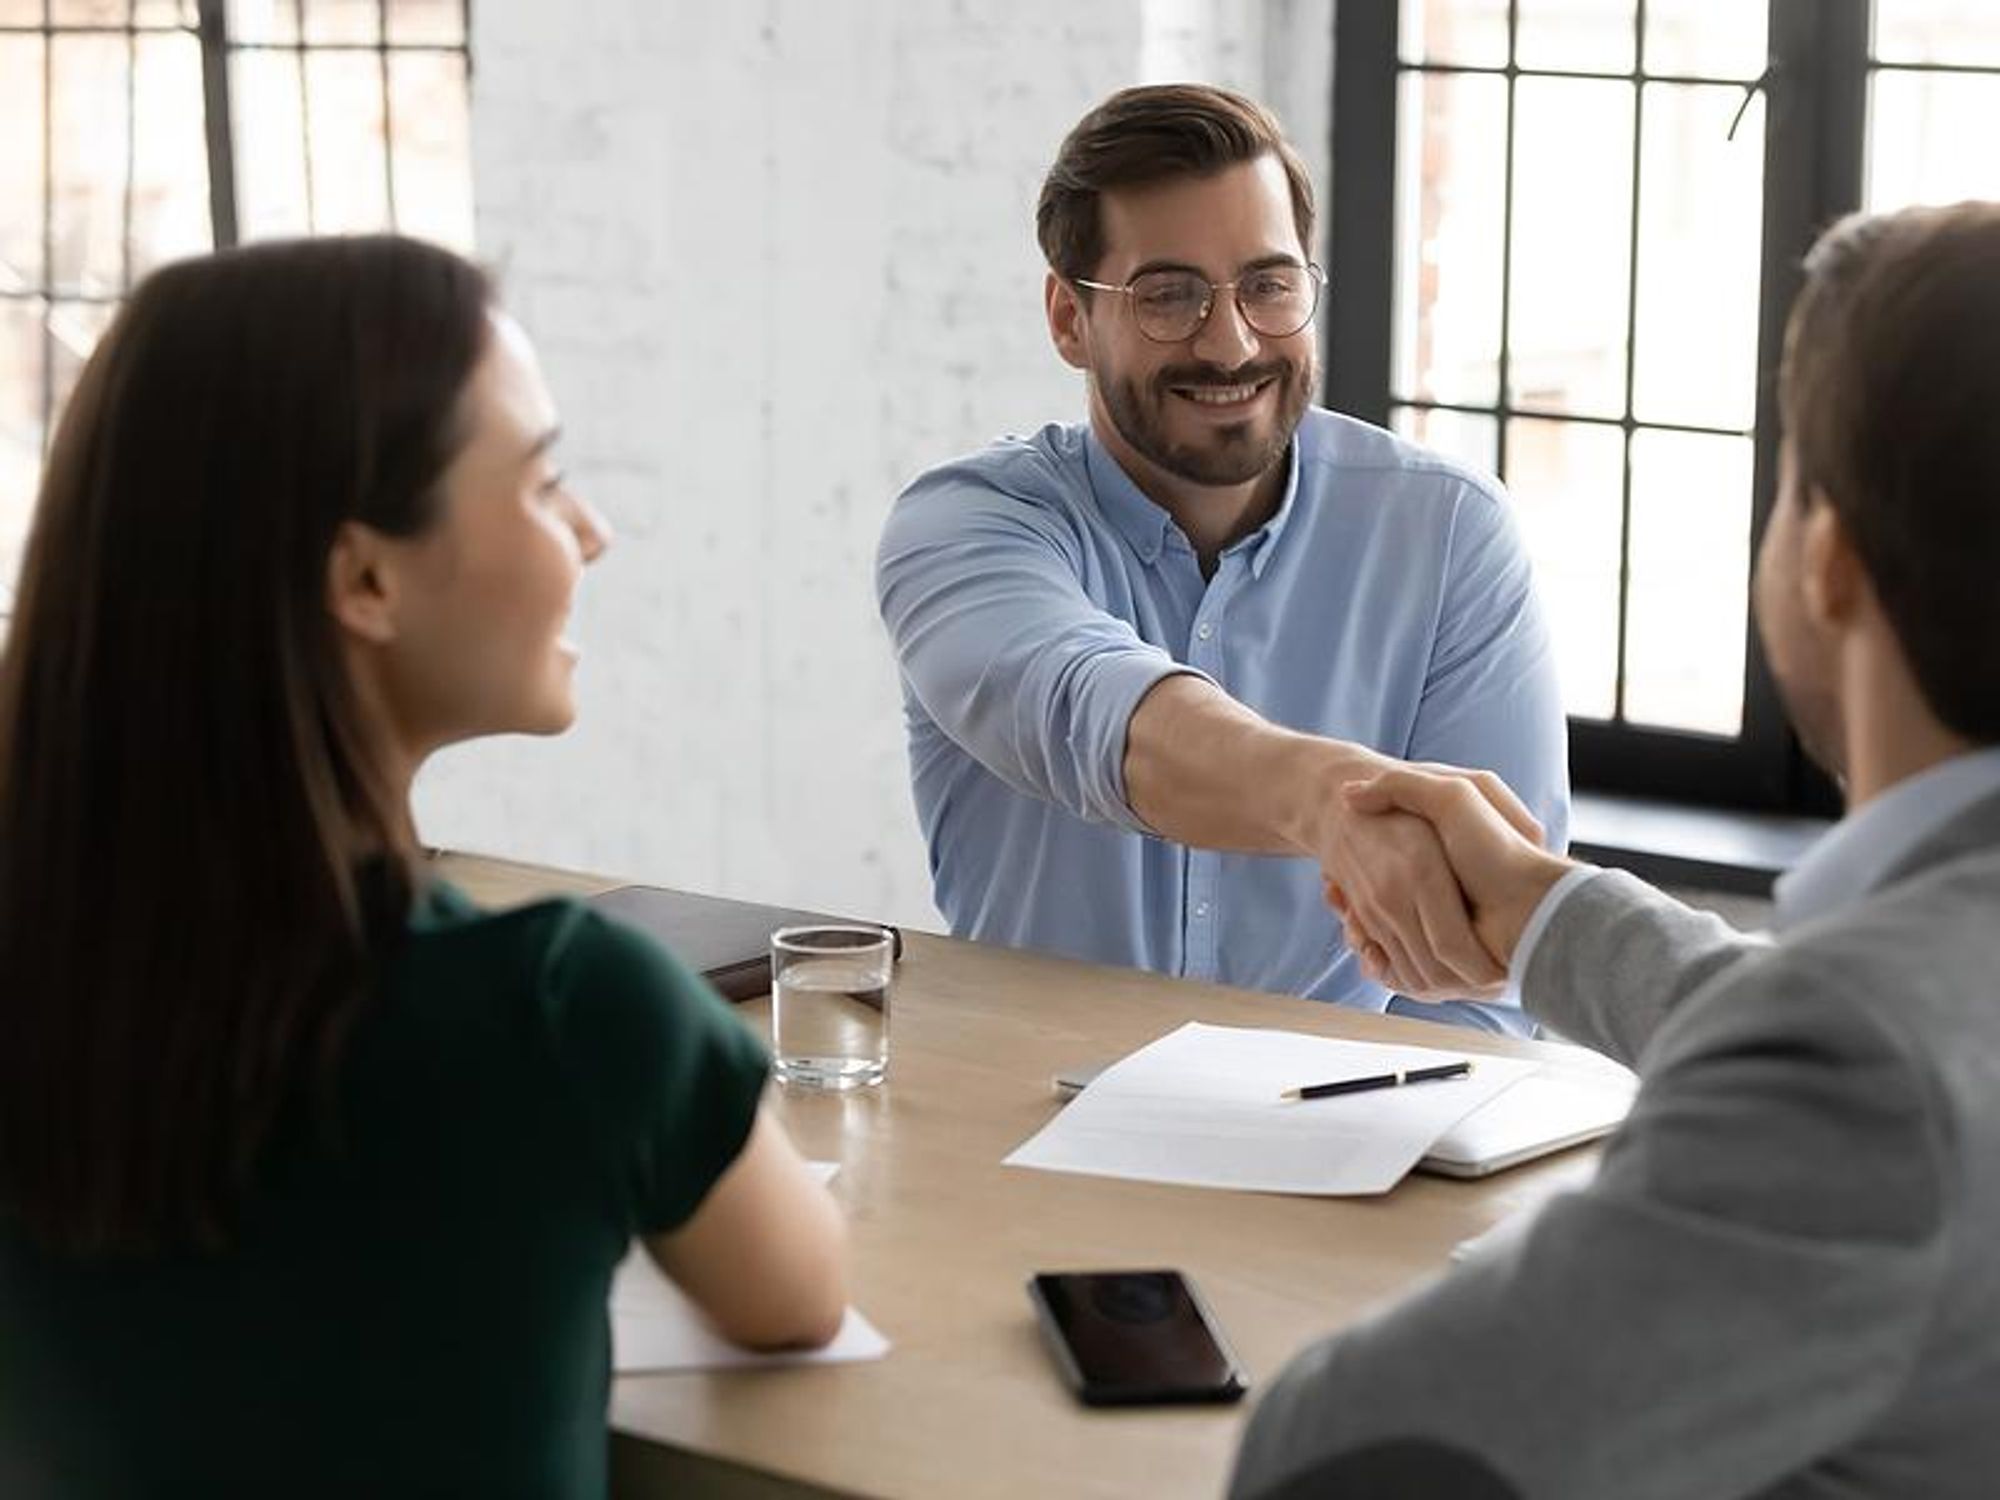 Job candidate shakes the hiring manager's hand